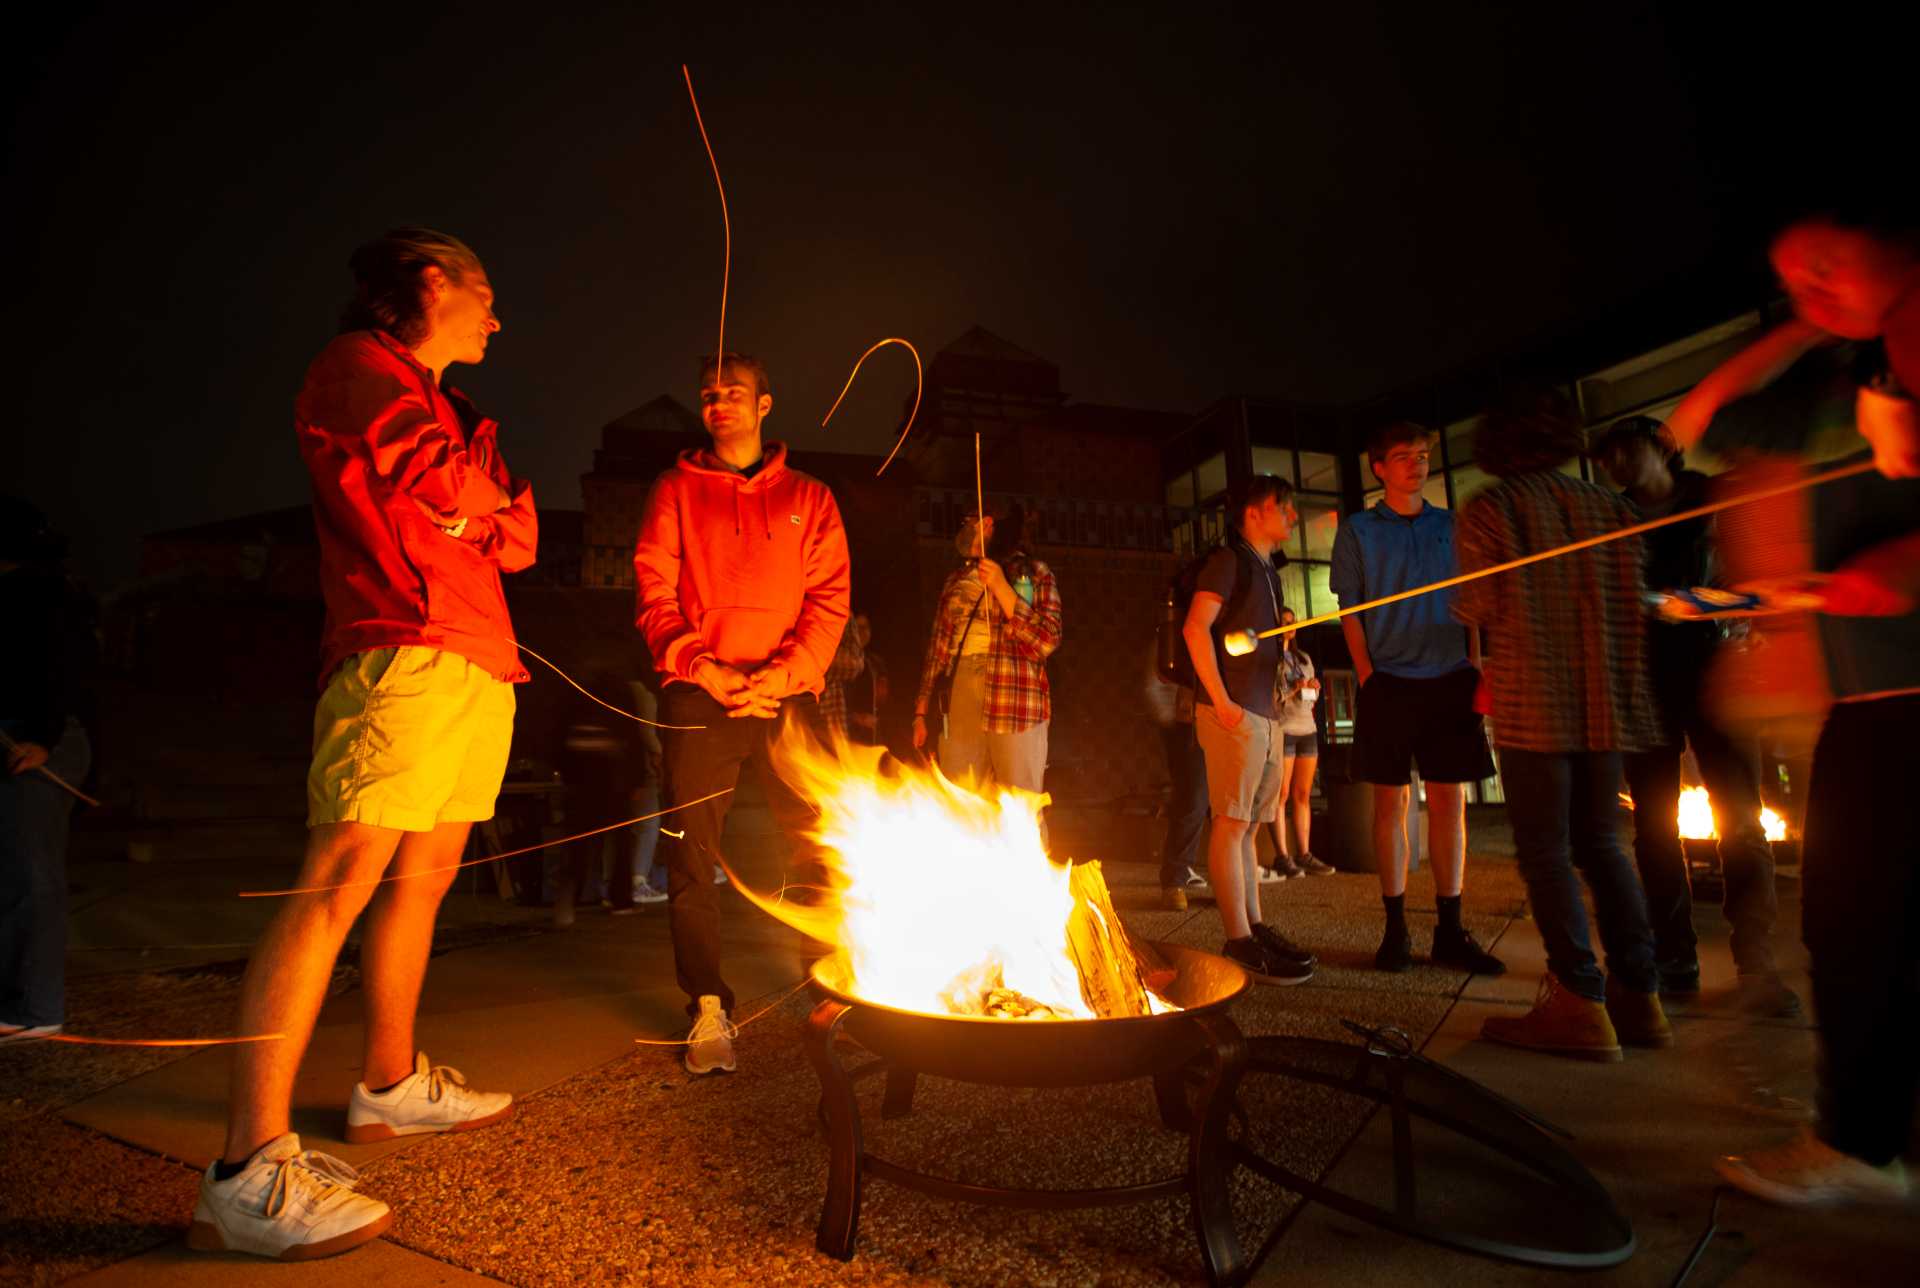 Matthew Pavlik, a sophomore, talks with Myles Luedecke, a junior, while standing around a fire during the Welcome Back Bon Fire in the Wriston Amphitheater.